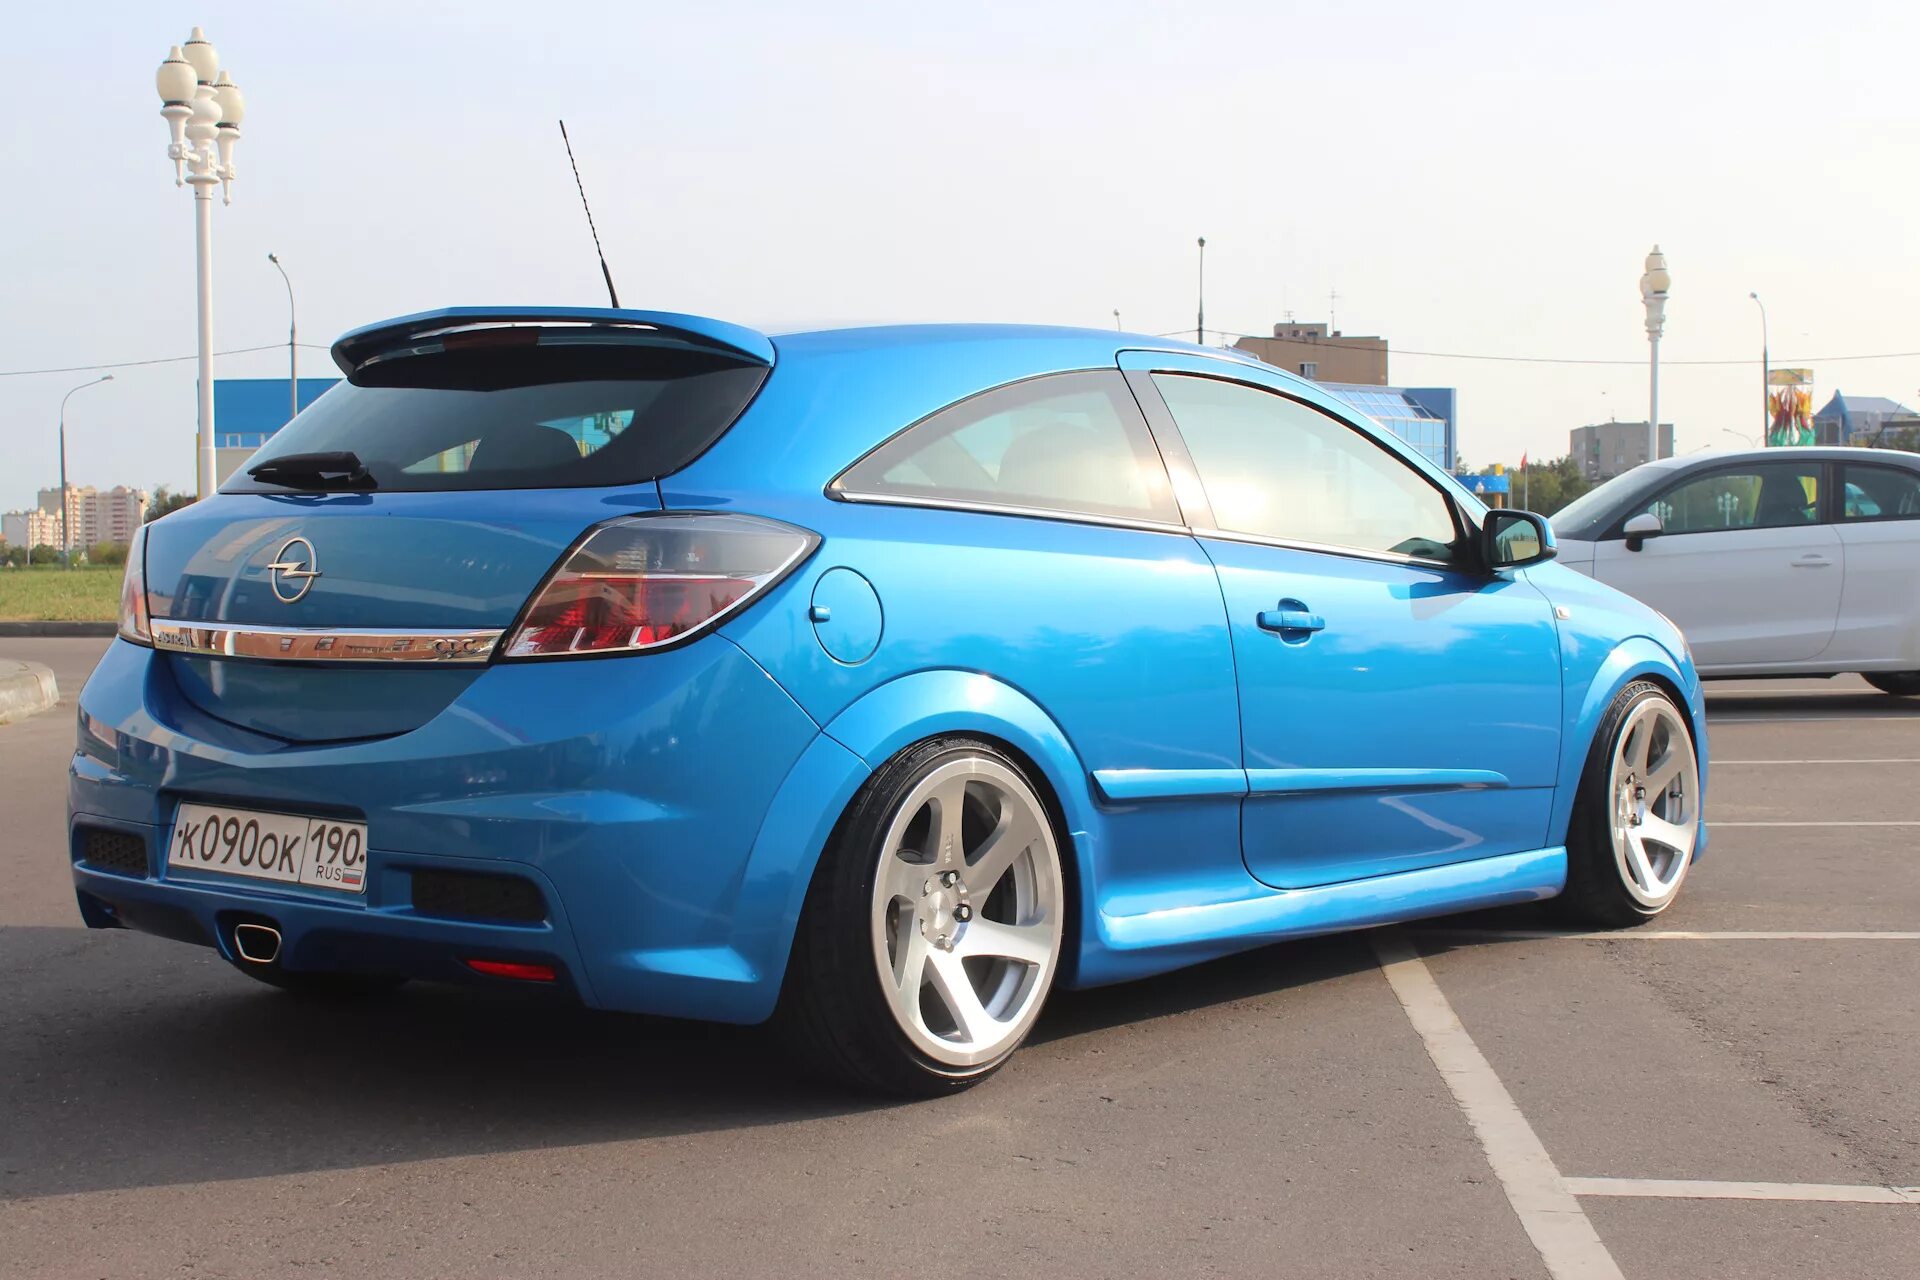 Opel Astra h OPC. Opel Astra GTC OPC 2008. Opel Astra OPC 2008. Opel Astra h OPC 2008.